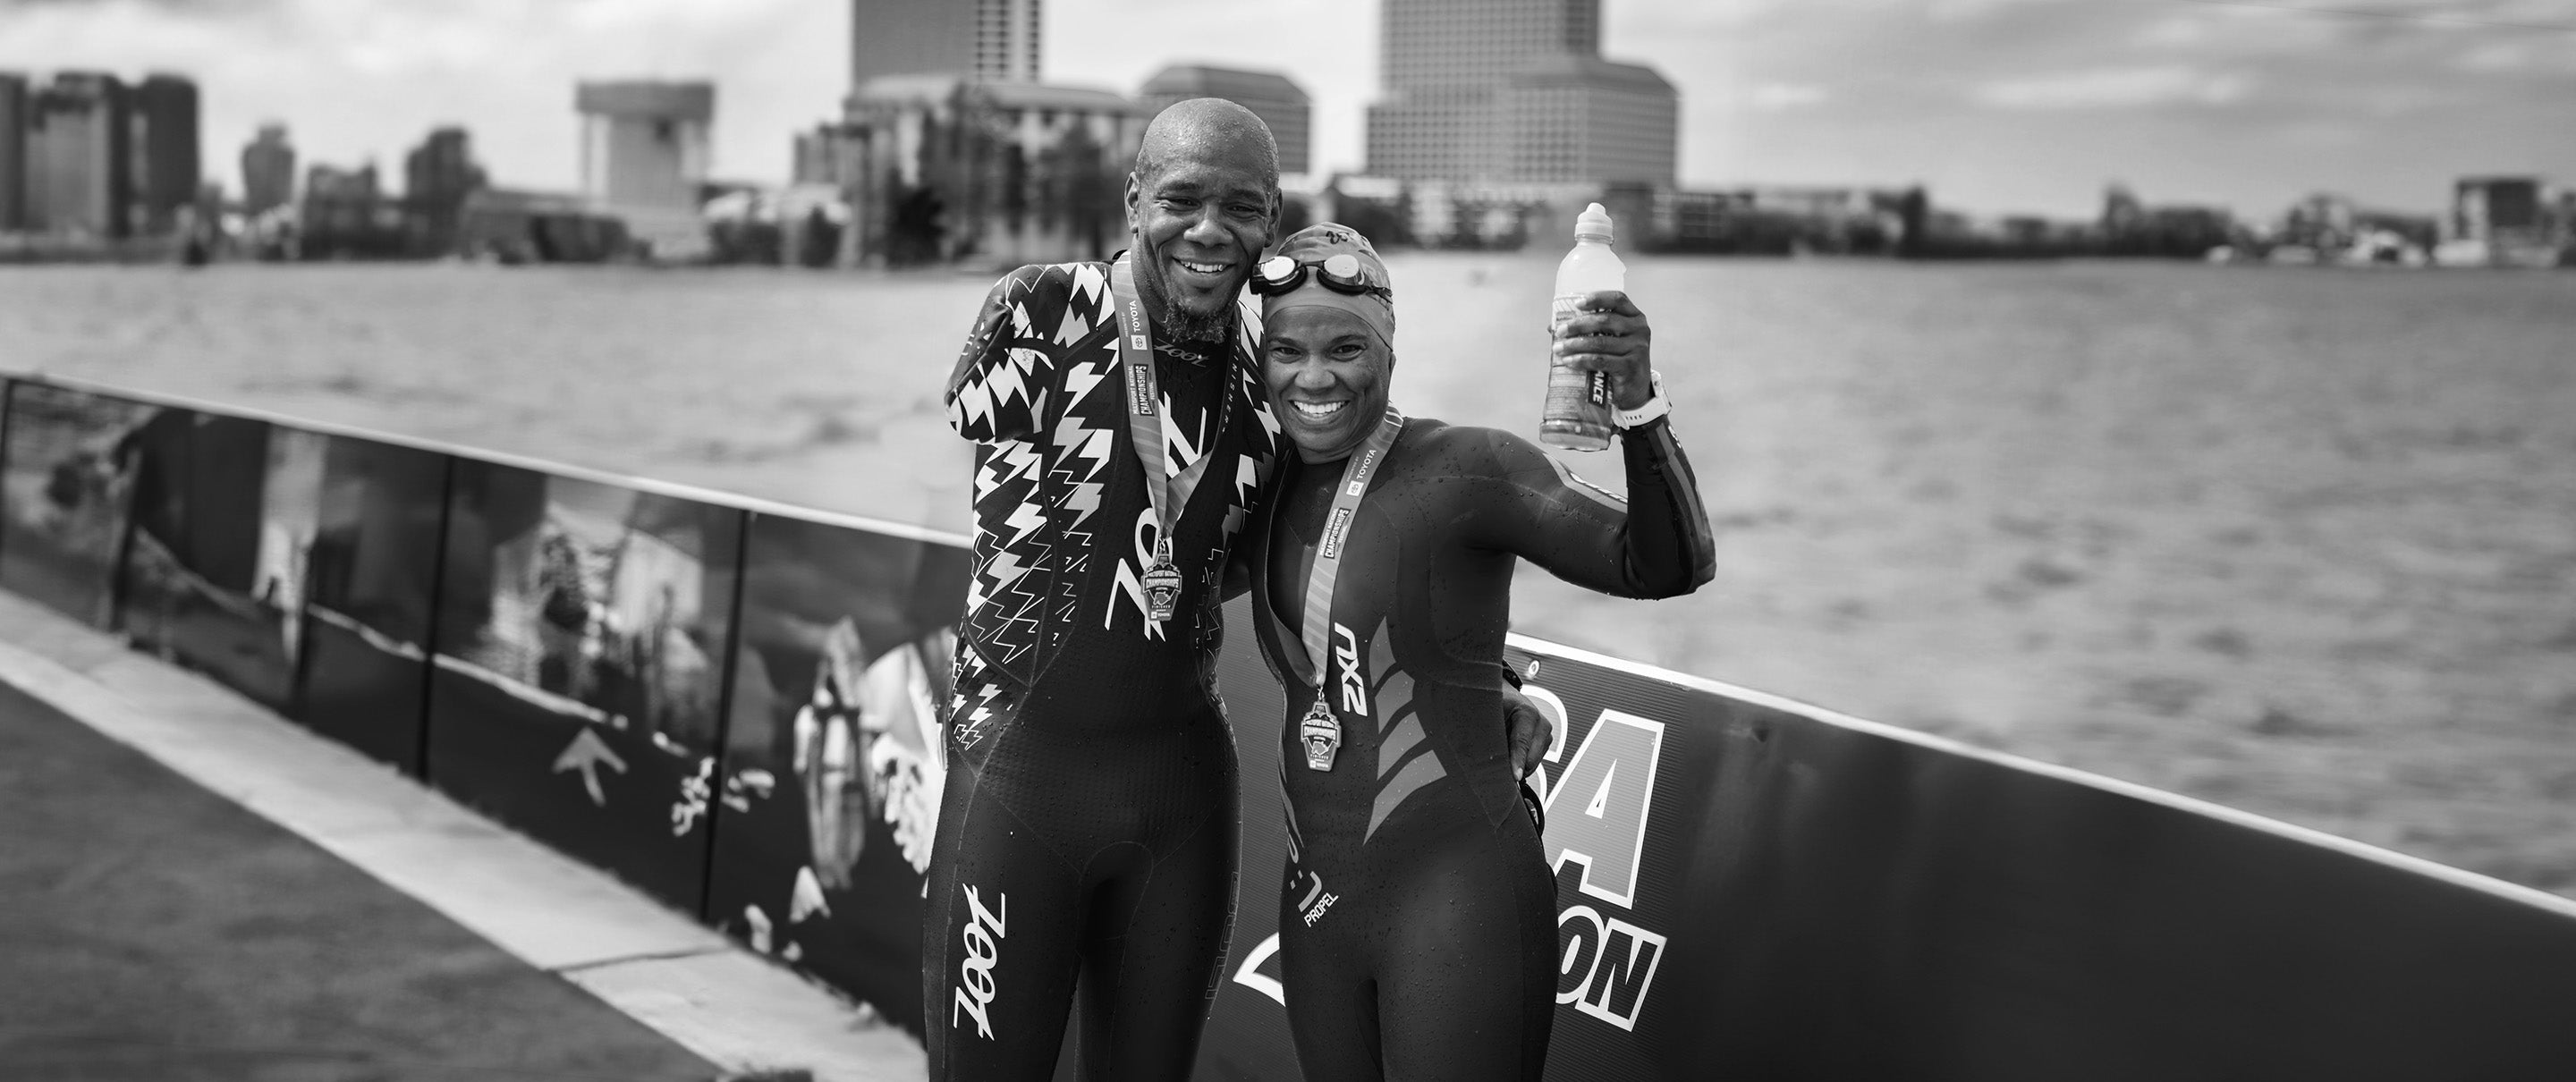 Man and woman wearing wetsuits and medals standing on a bridge